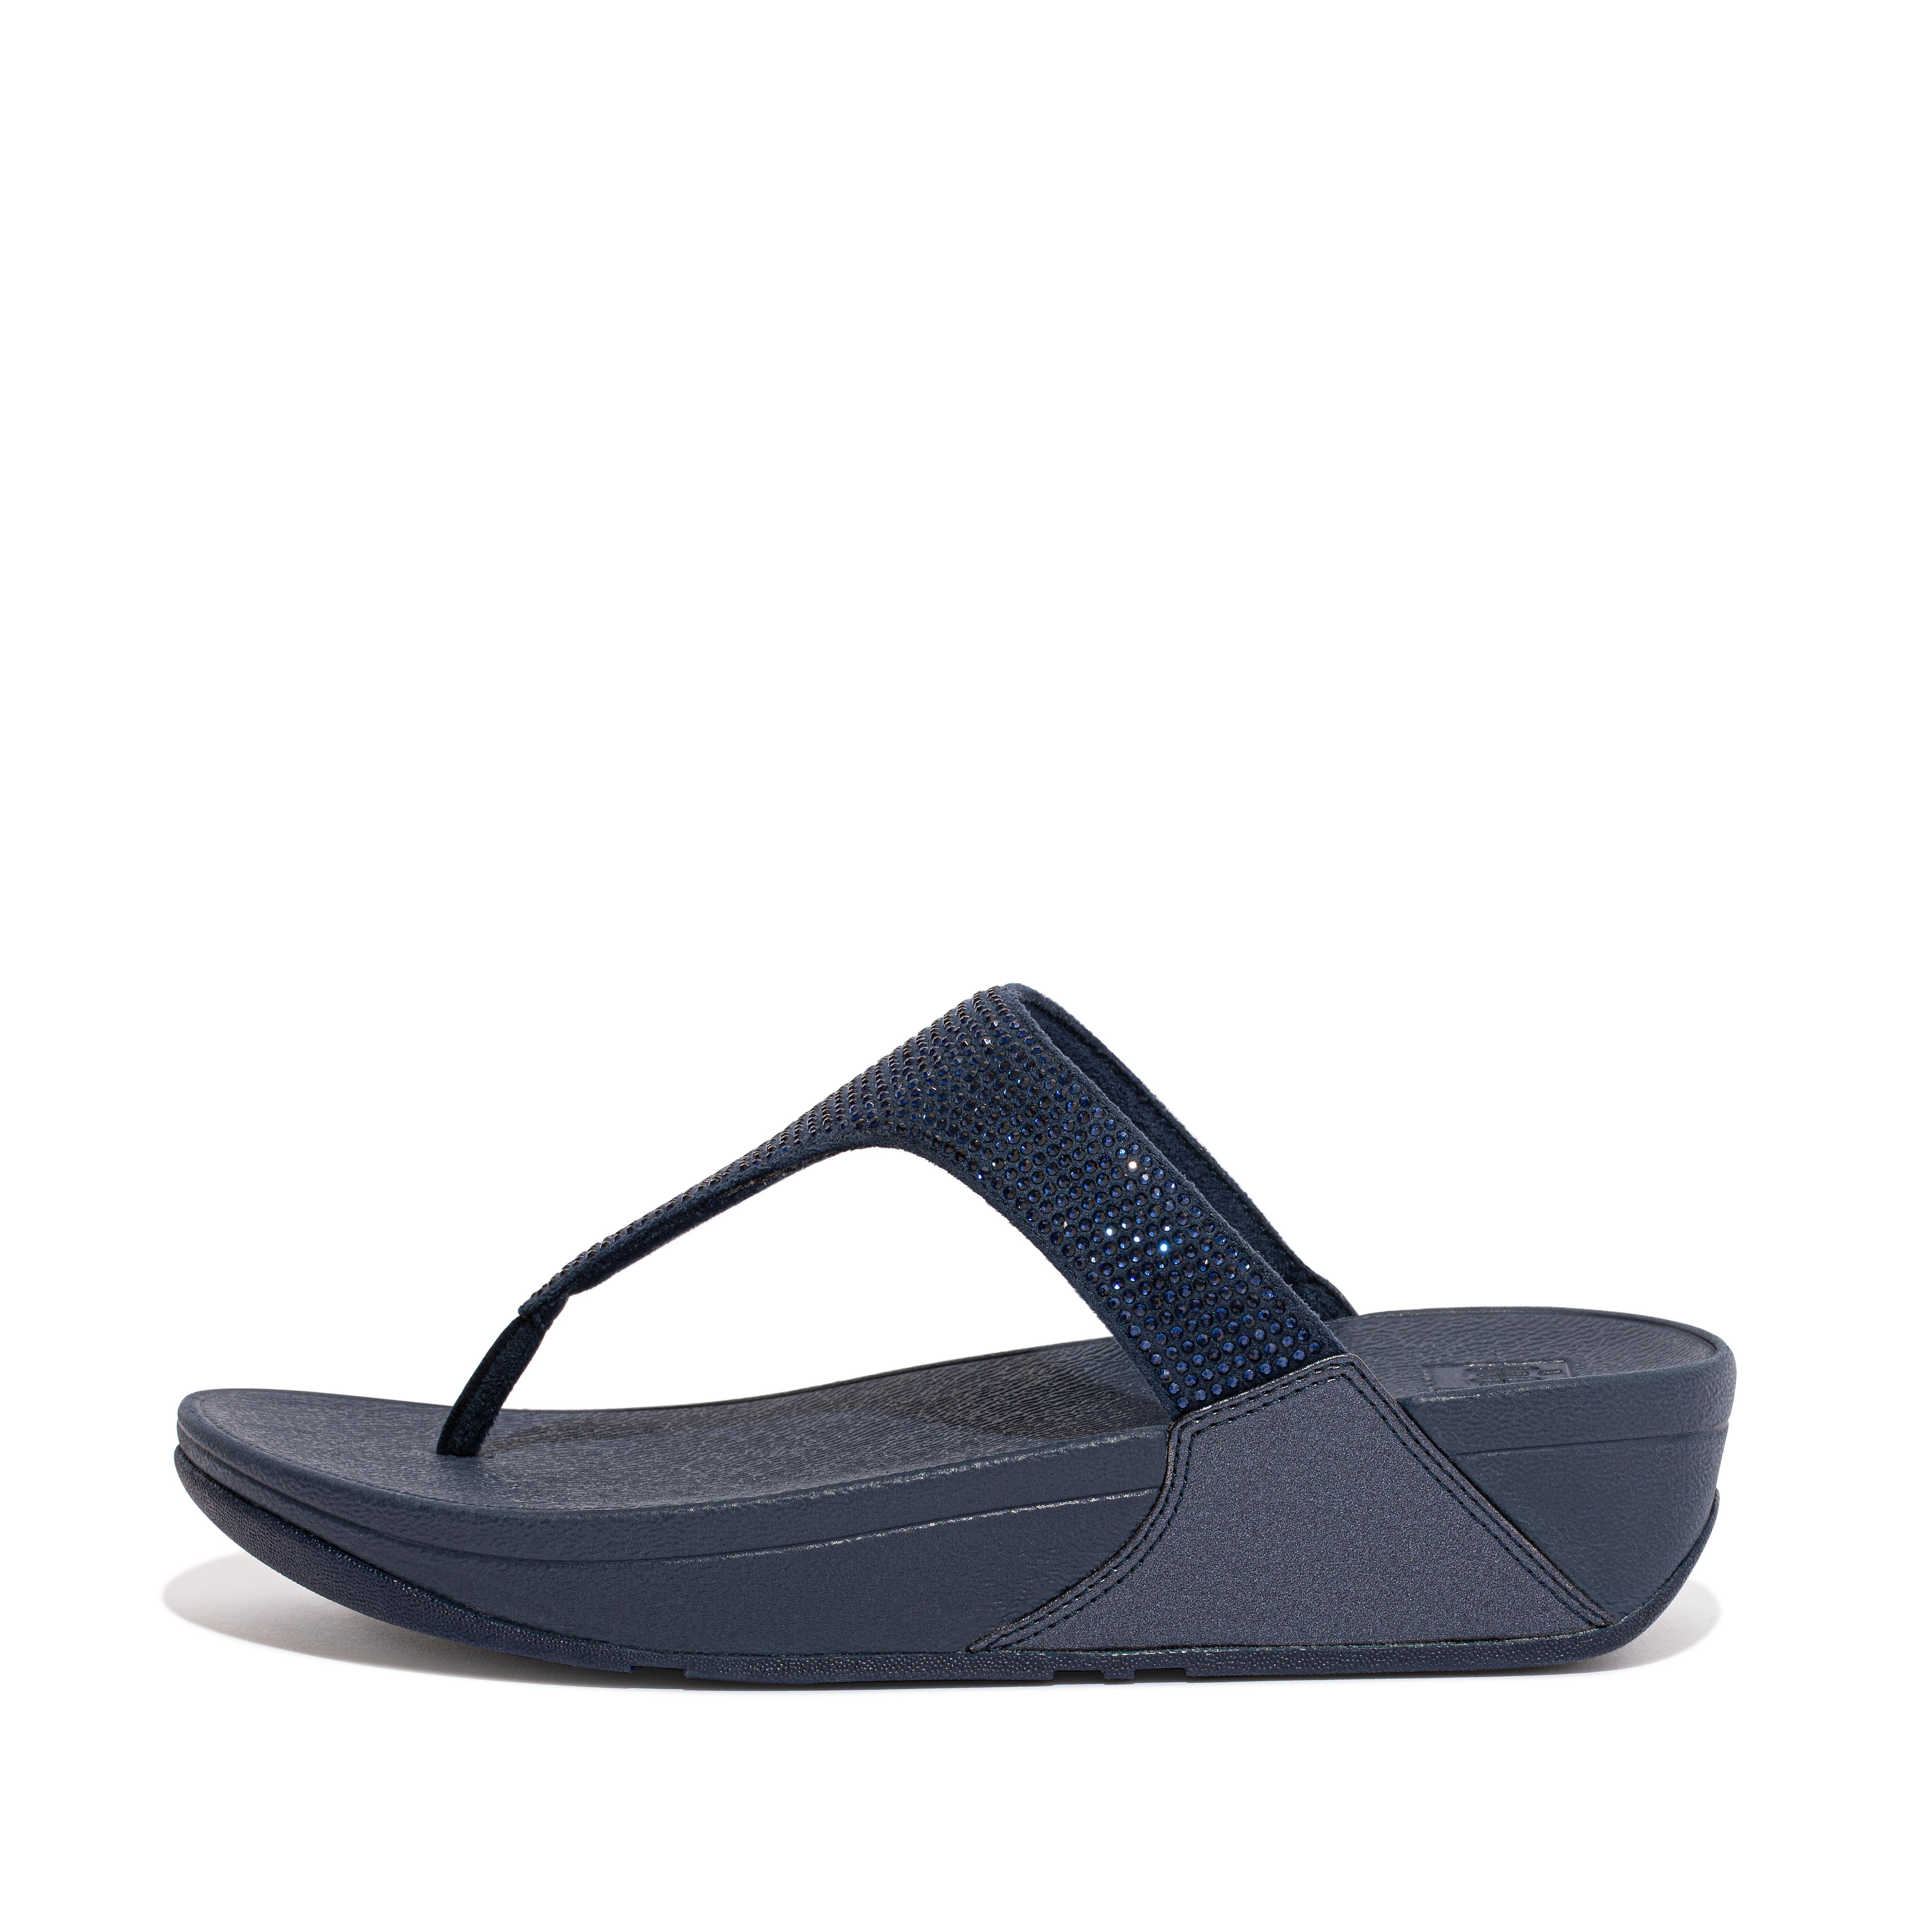 Fitflop Crystal Toe-Post Sandals